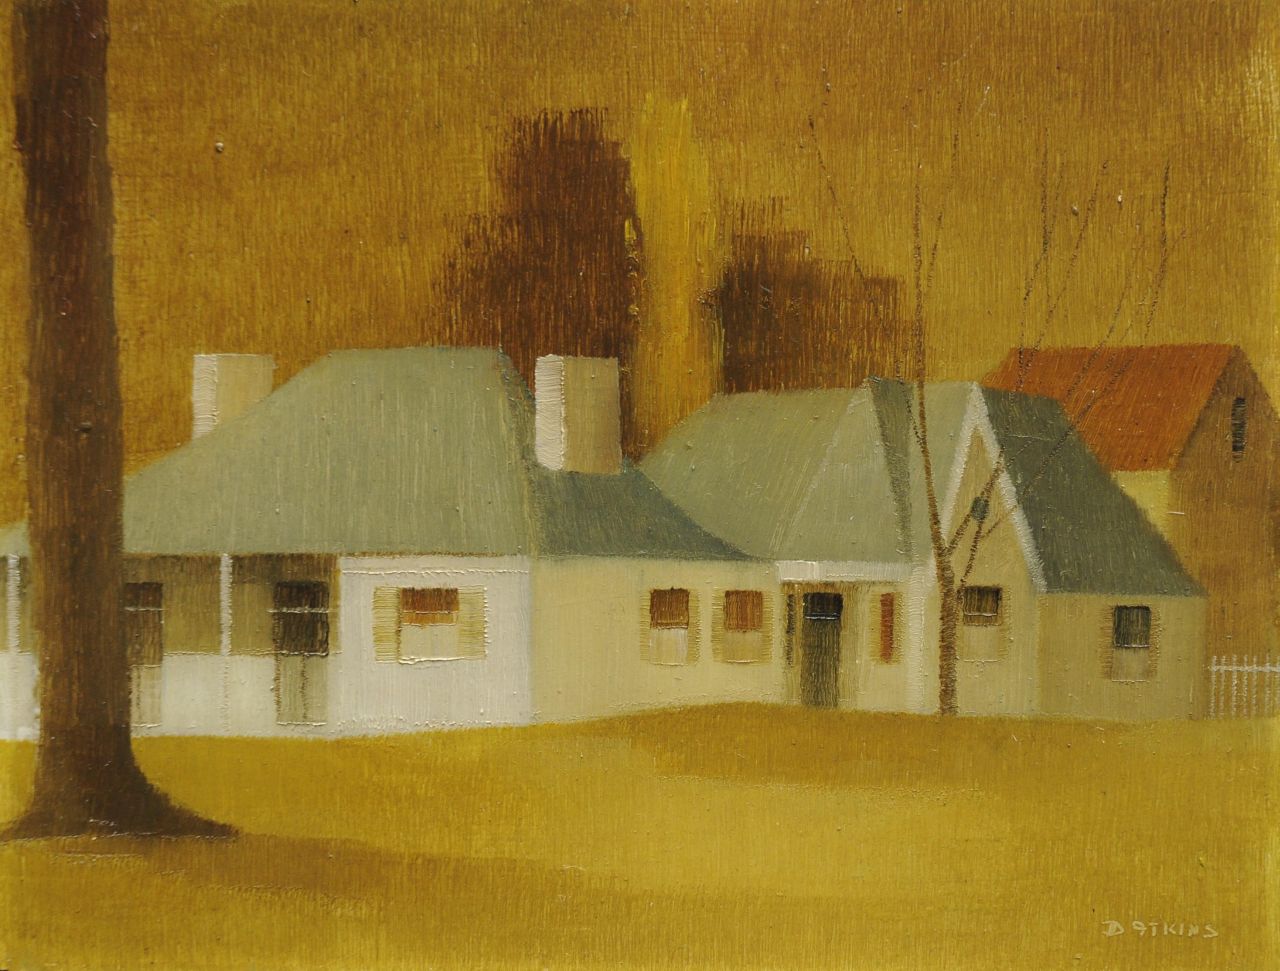 Atkins D.  | Dorothy Atkins | Paintings offered for sale | Firholme, Parramatta (Australia), oil on board 17.4 x 22.7 cm, signed l.r.